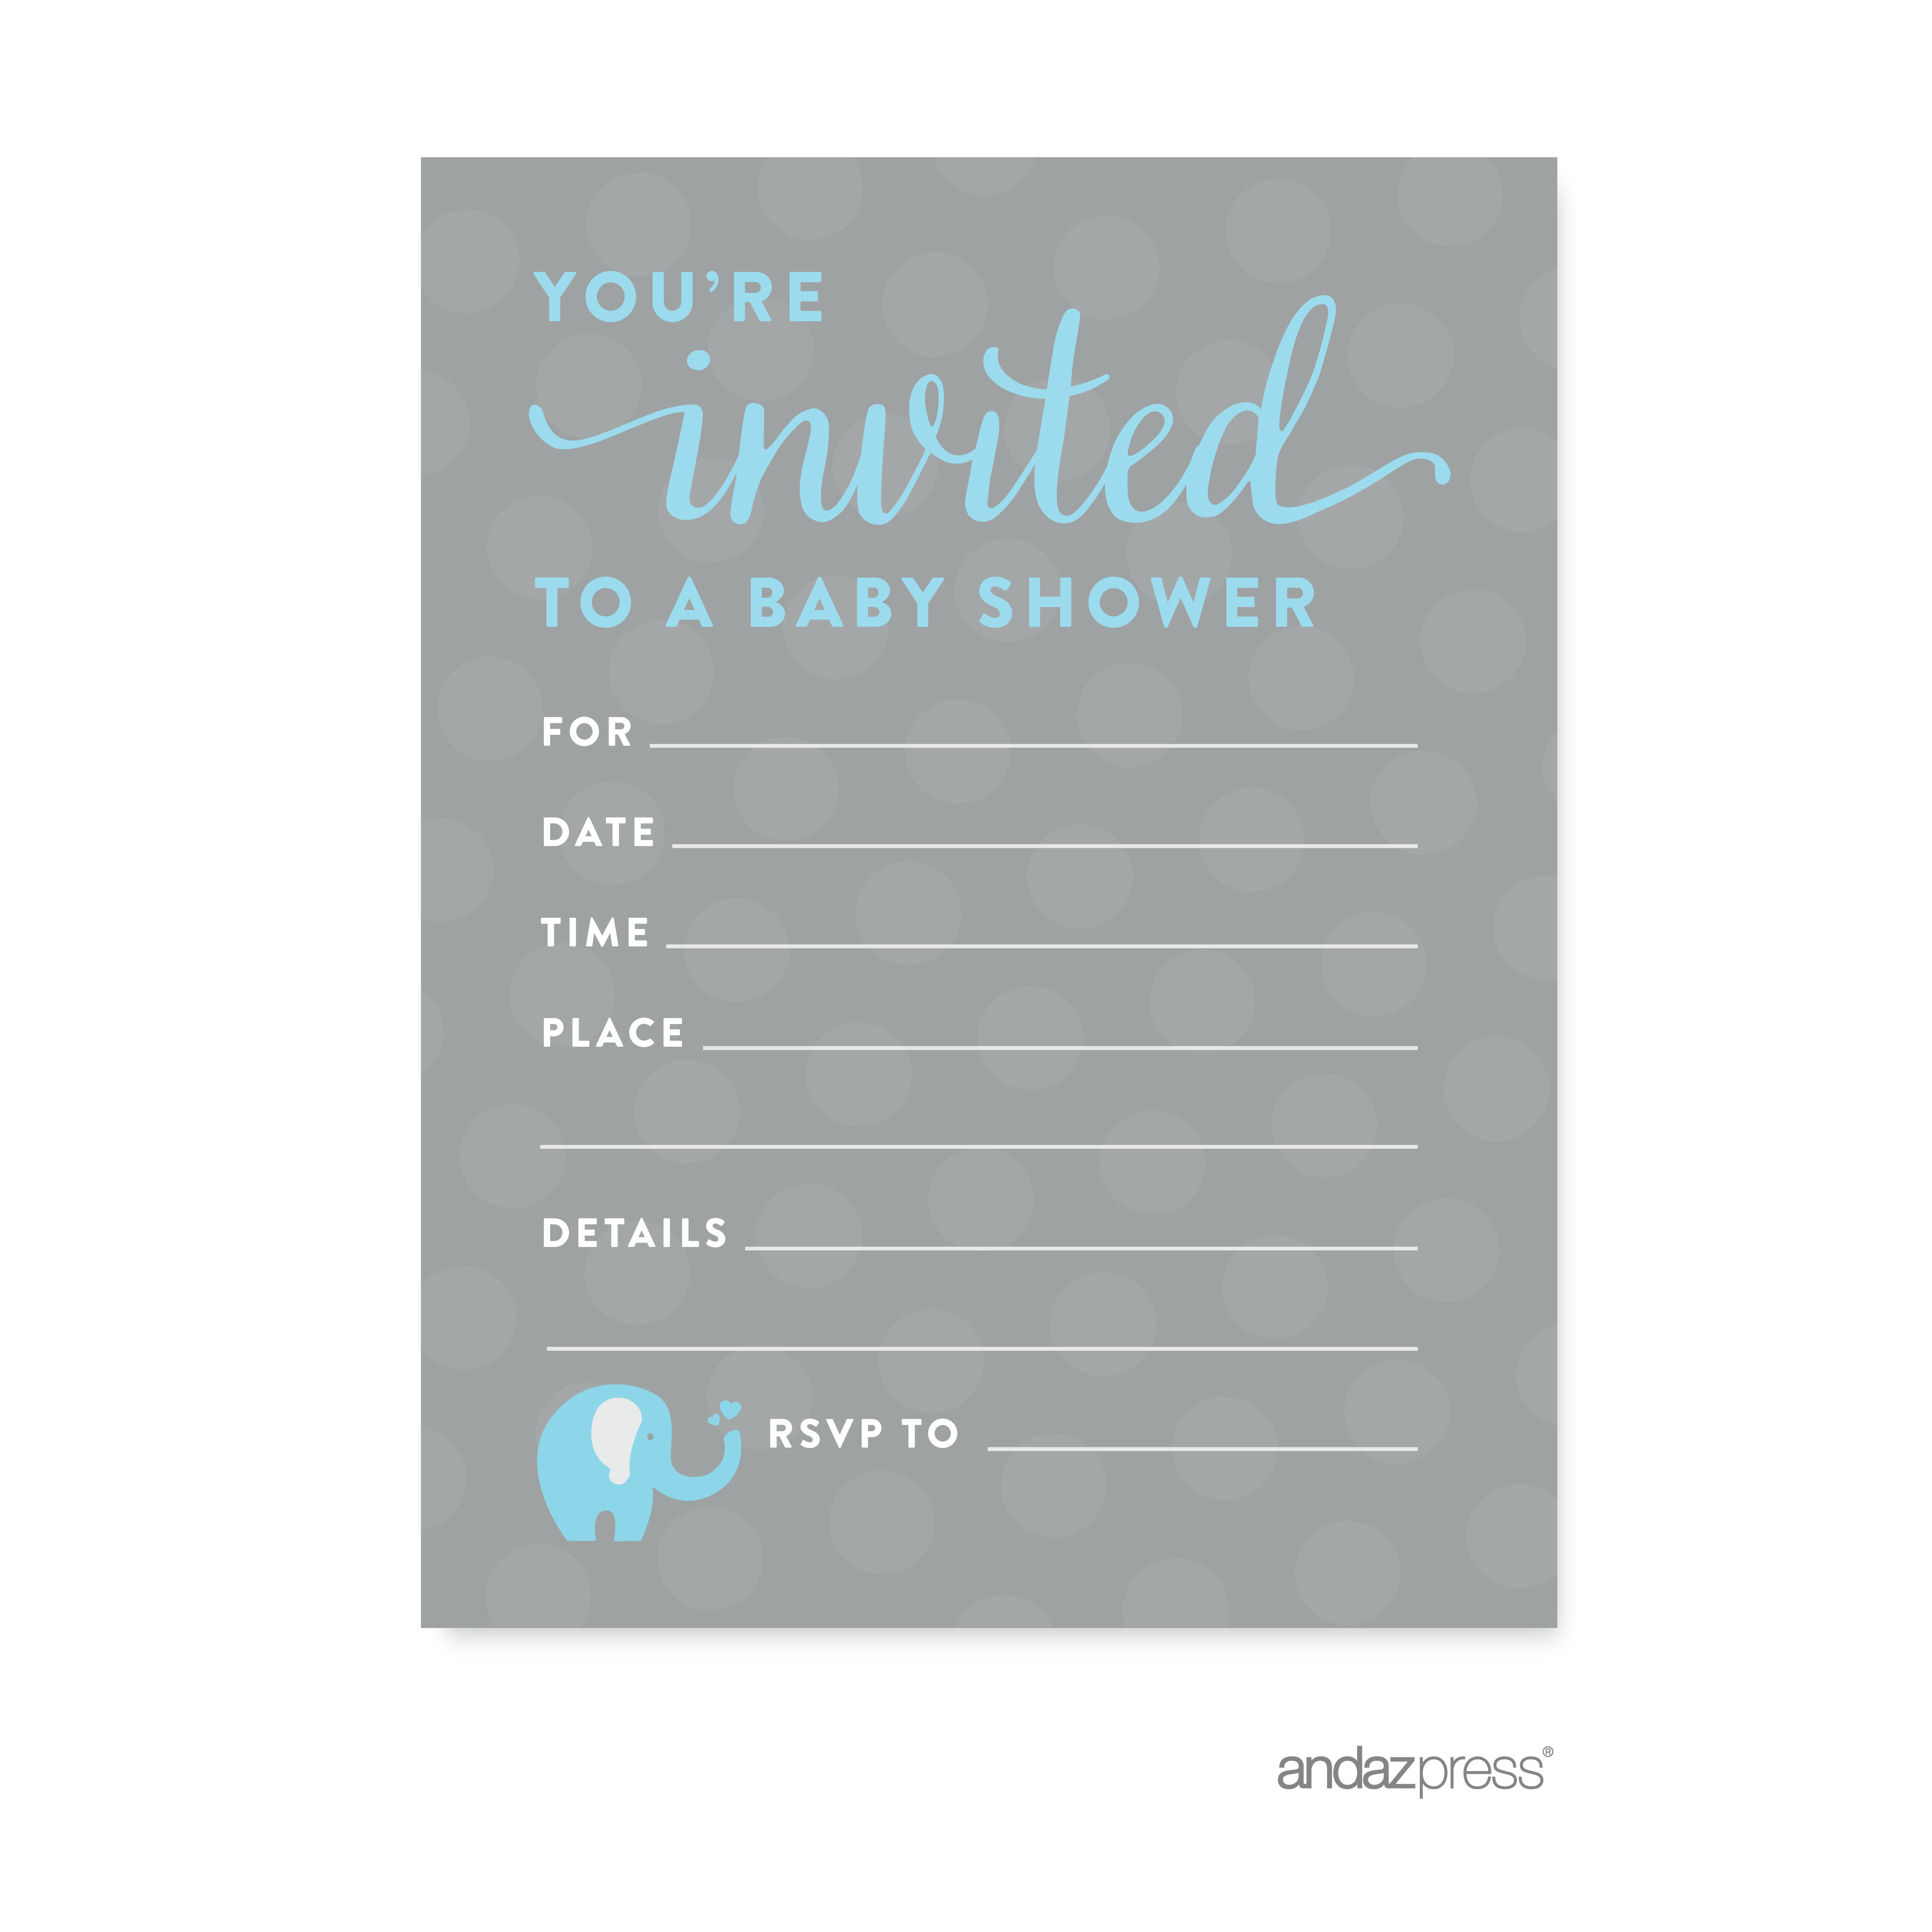 Full Size of Baby Shower:unique Baby Shower Themes Homemade Baby Shower Decorations Baby Shower Invitations Baby Girl Themes Unique Baby Shower Ideas Girl Baby Shower Decorations Baby Shower Invitations For Boys Baby Boy Shower Ideas